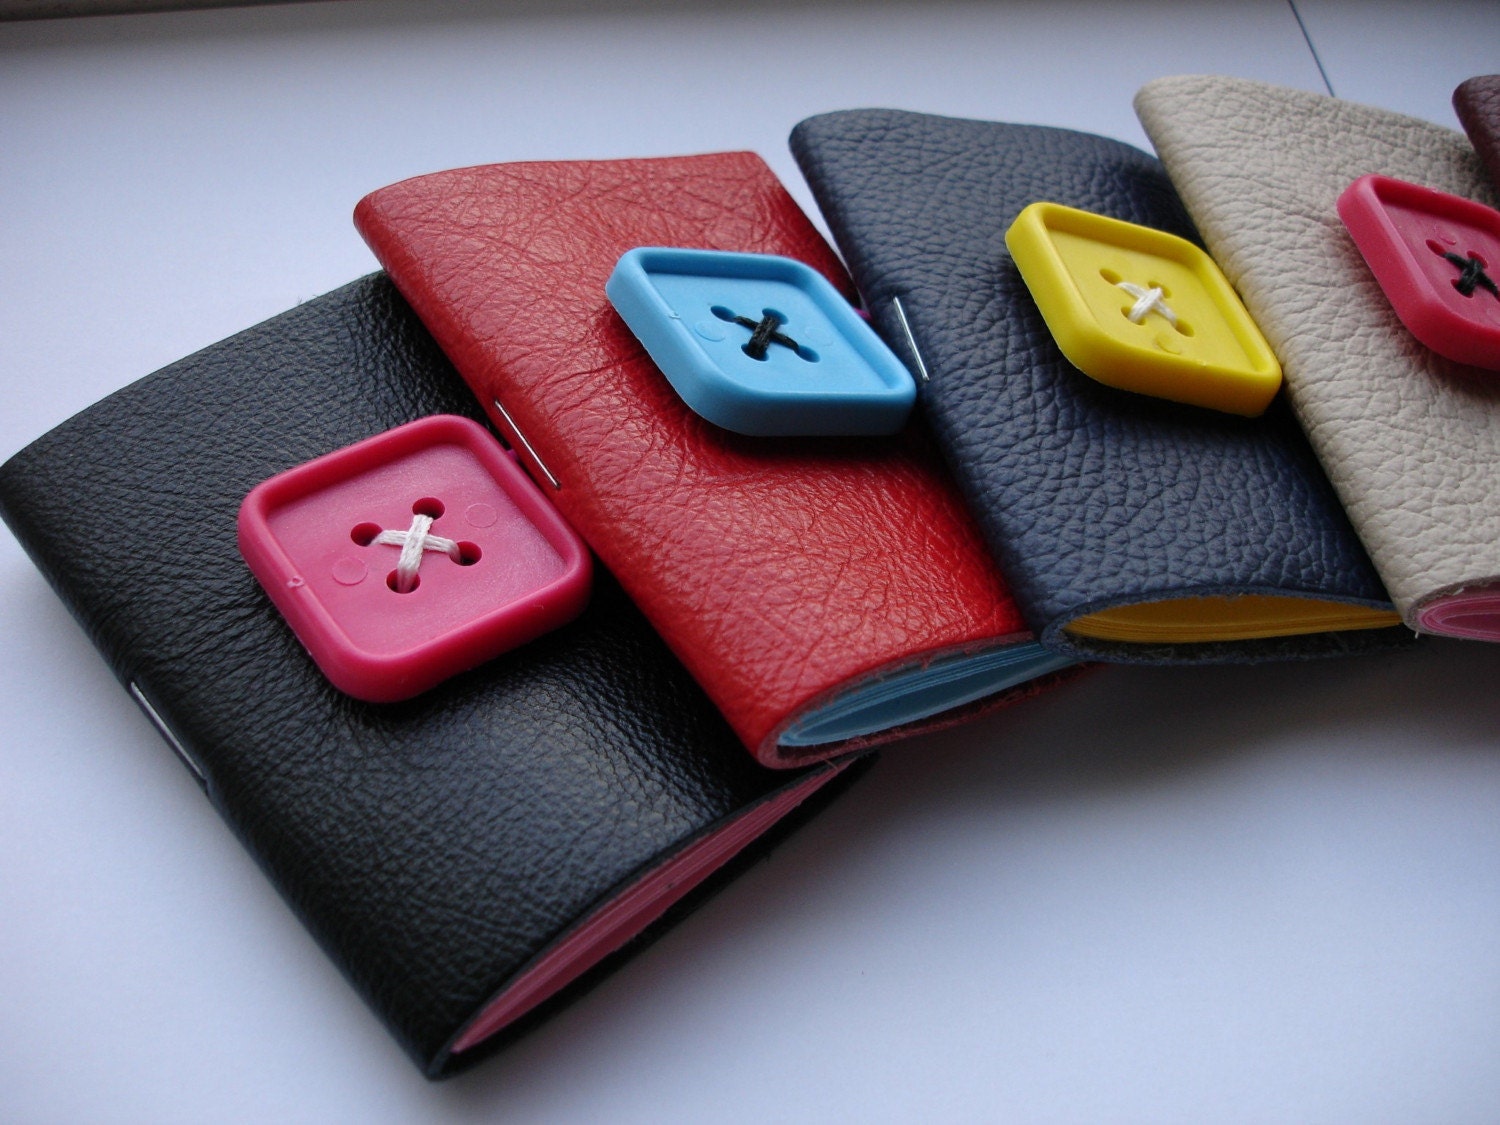 LOVE JOURNALS - Small Leather Notebook Journals with Square Buttons - 7 Colours Available - Gift Idea - MADE TO ORDER